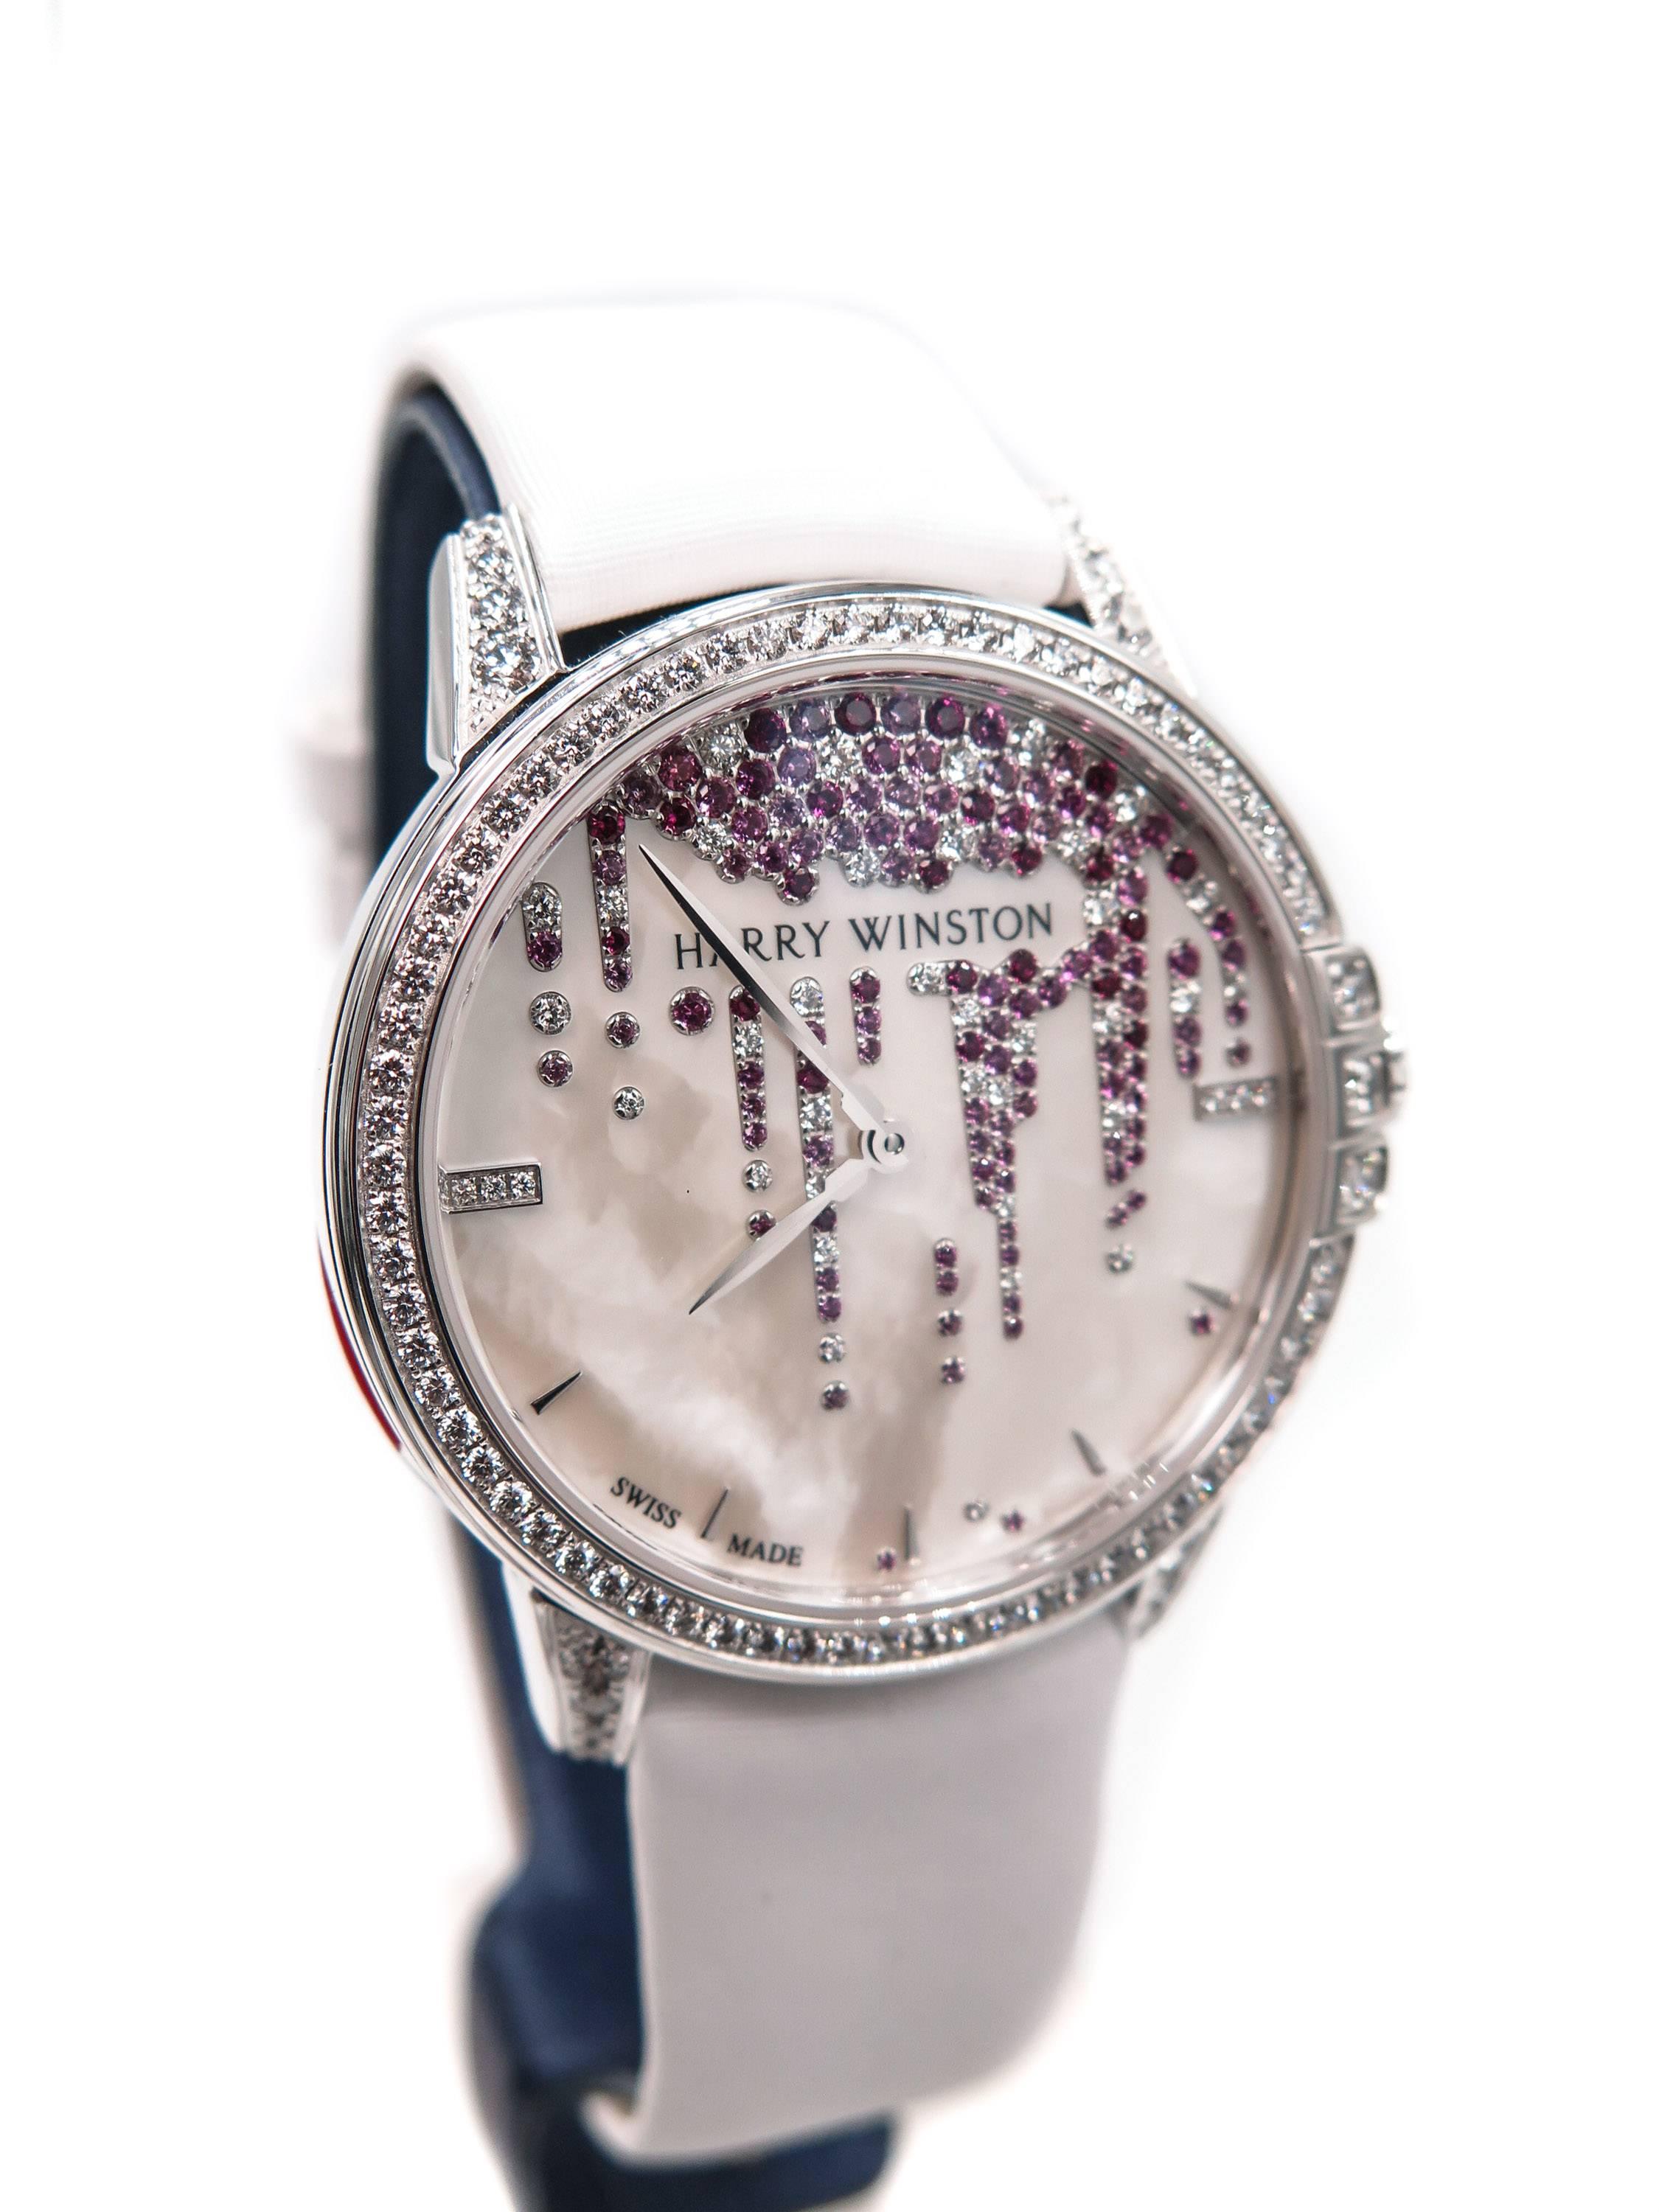 Effortlessly elegant and timelessly classical, this Midnight timepiece is exquisite!
Midnight Diamond Stalactites 36mm in 18k white gold. 
Mechanical automatic winding, 28 jewels, 28,800 vibrations per hour. 
Open sapphire crystal case back.
The